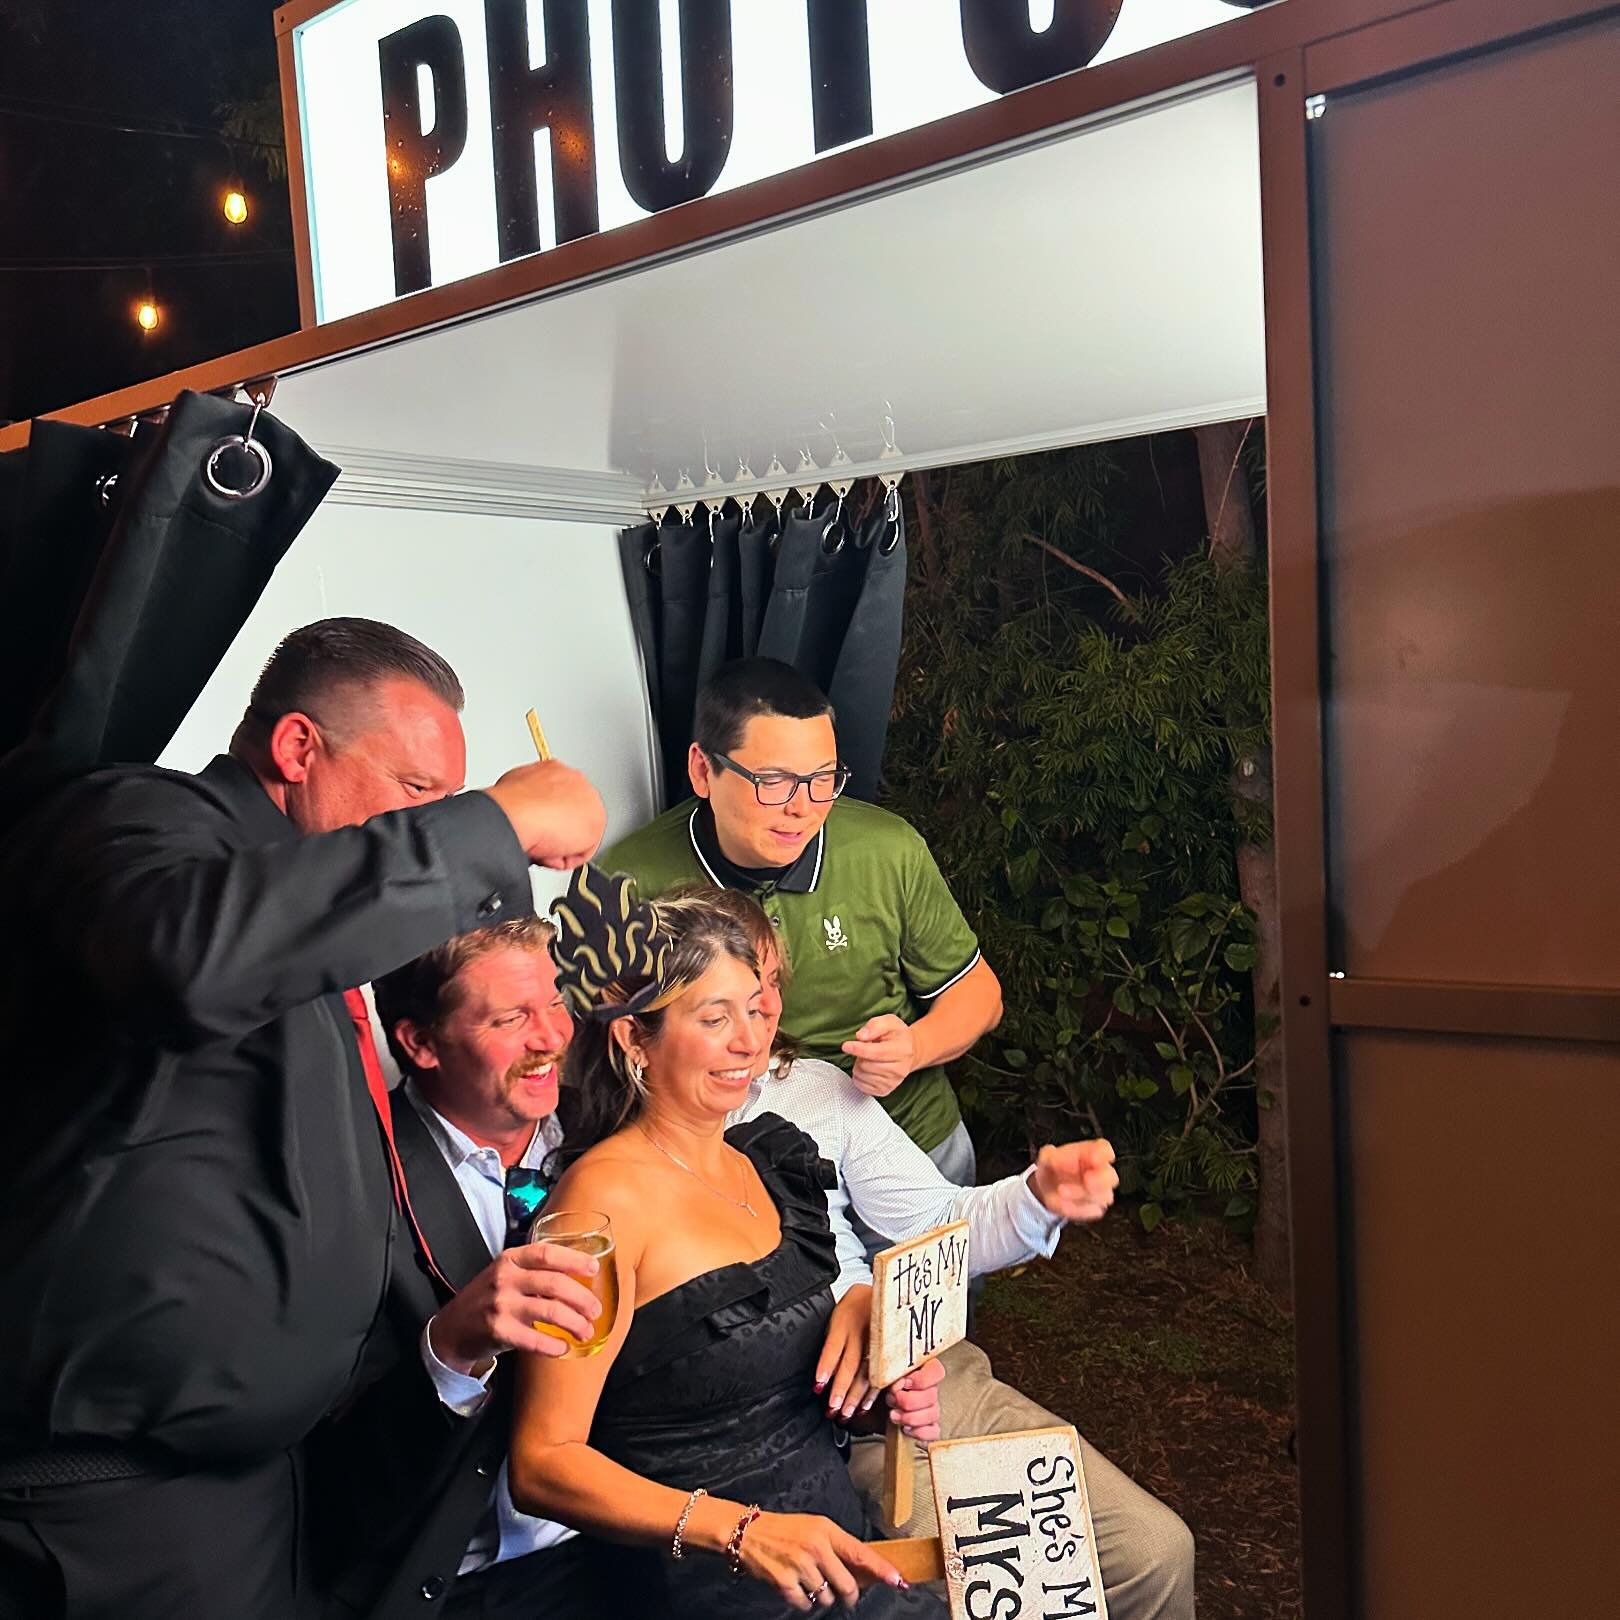 Piling in the booth always makes for a fun time, and great photos!!!
.
.
.
.
.
#lbphotobooth #photobooth #photos #weddings #love #events #props #lbc #longbeach #parties #fun #lbphotoboothco #longbeachphotobooth #longbeachcalifornia #photoboothevents 